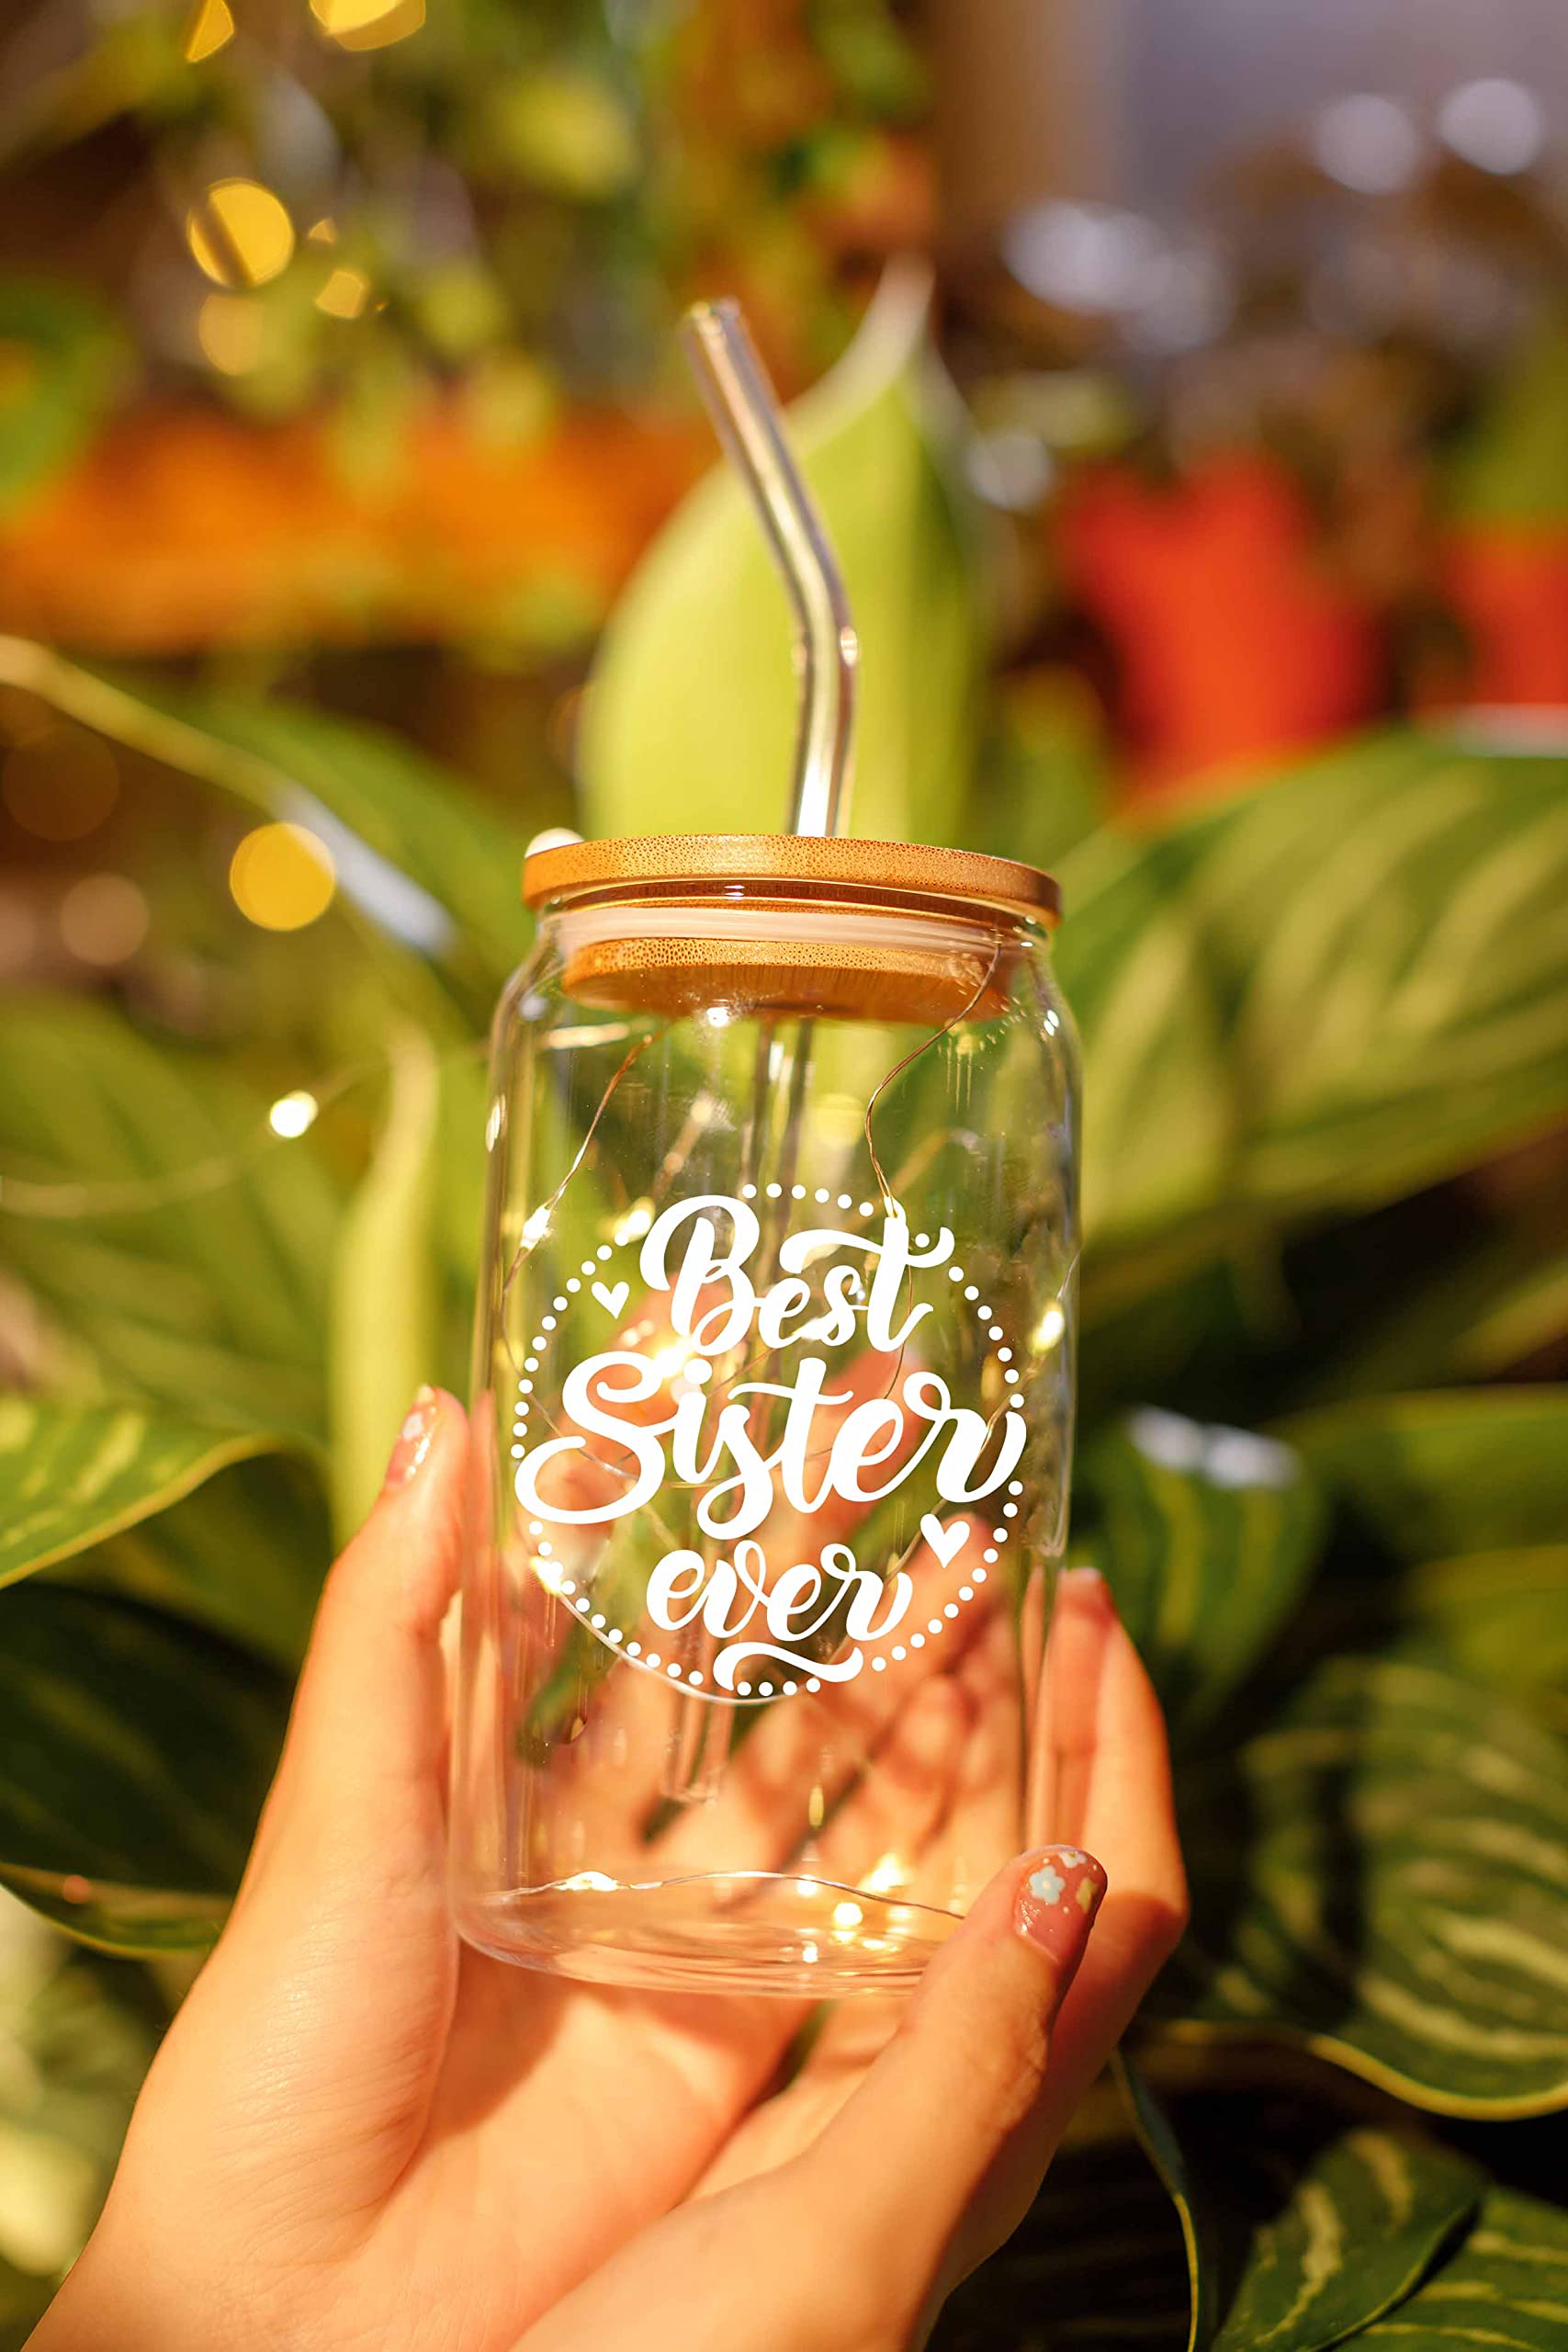 NewEleven Mothers Day Gifts For Sister From Sister, Brother - Unique Birthday Present For Sister, Soul Sister, Big Sister, Little Sister, Sister In Law, Sibling, Bestie - 16 Oz Coffee Glass